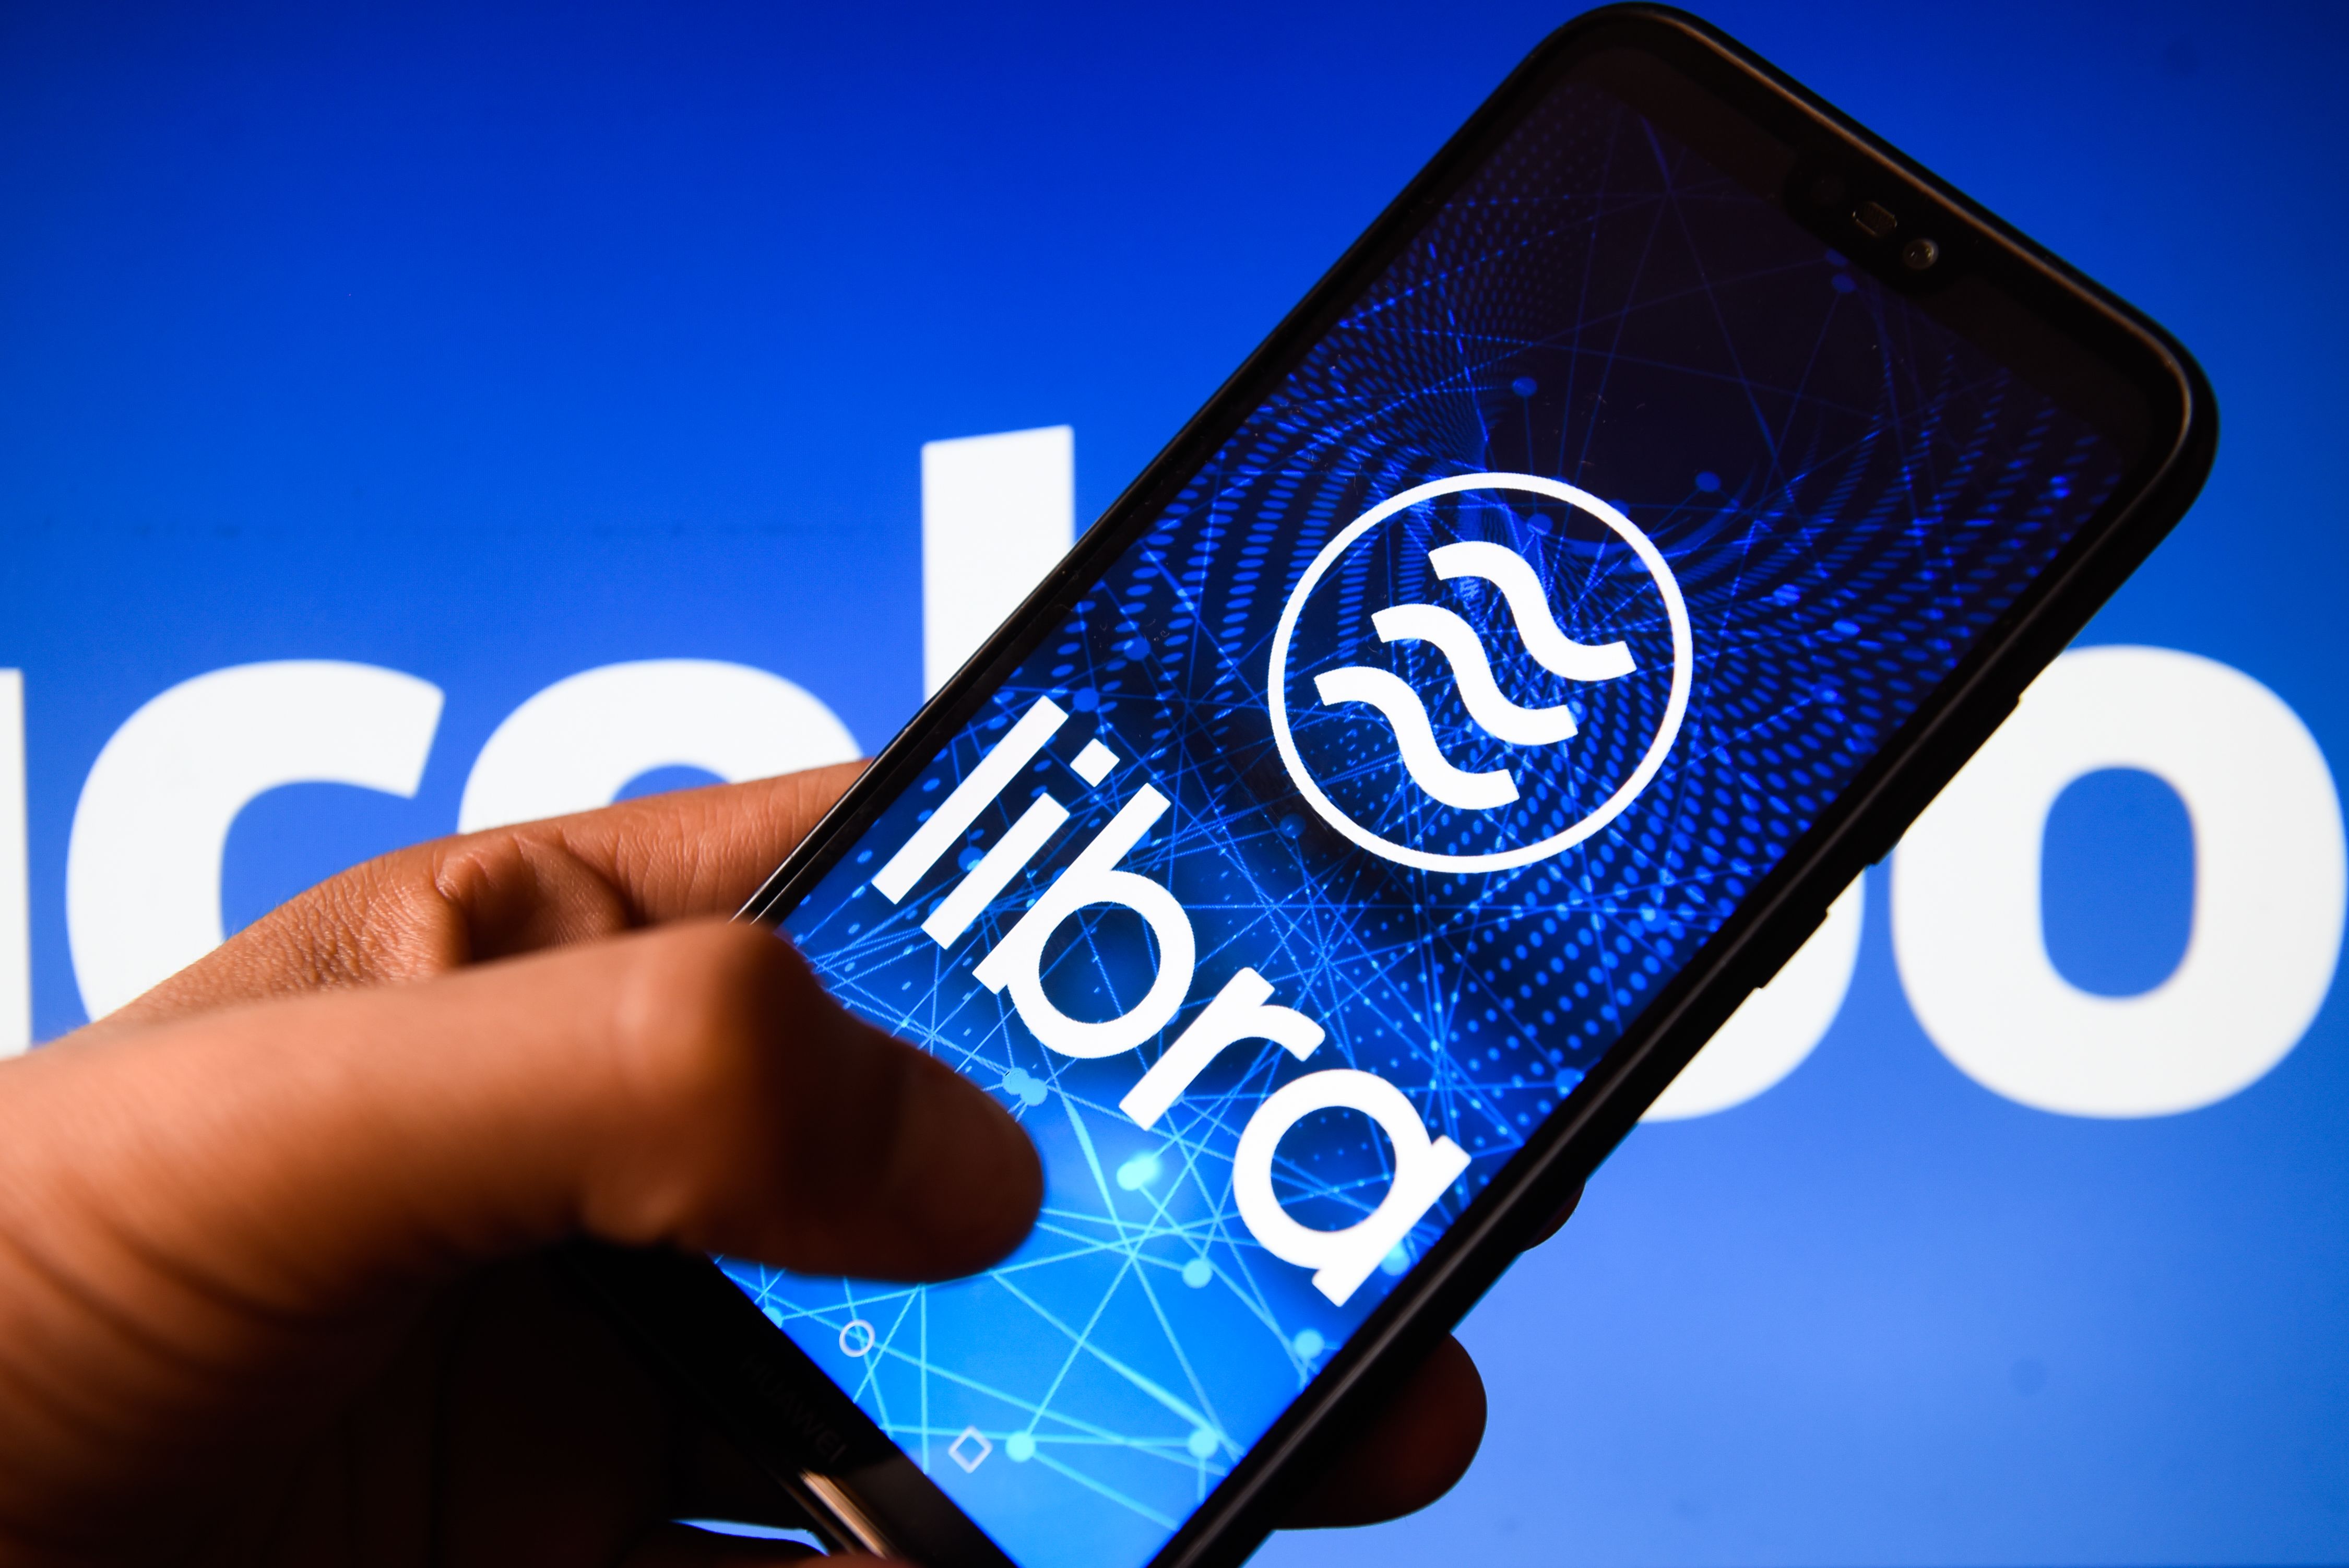 Britain won't try to stop Facebook Libra coin: UK finance minister